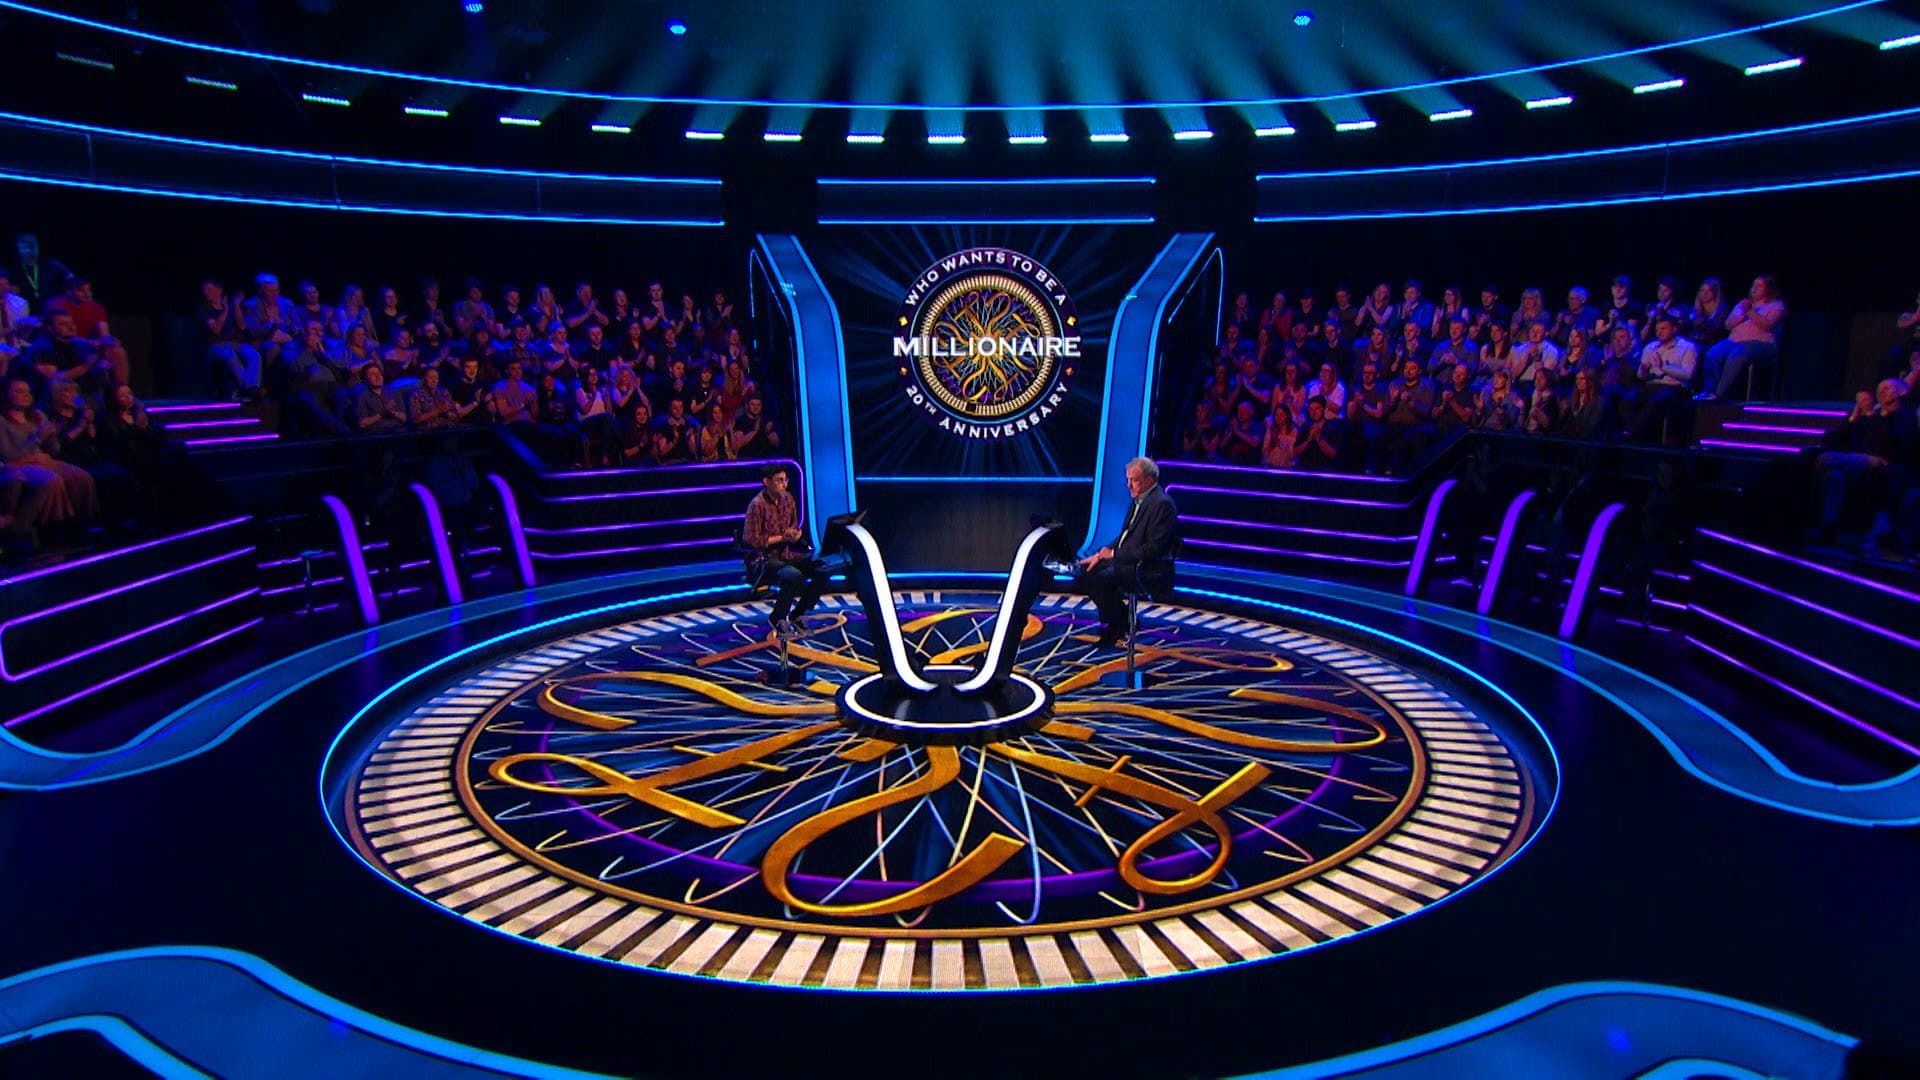 Who Wants to Be a Millionaire background